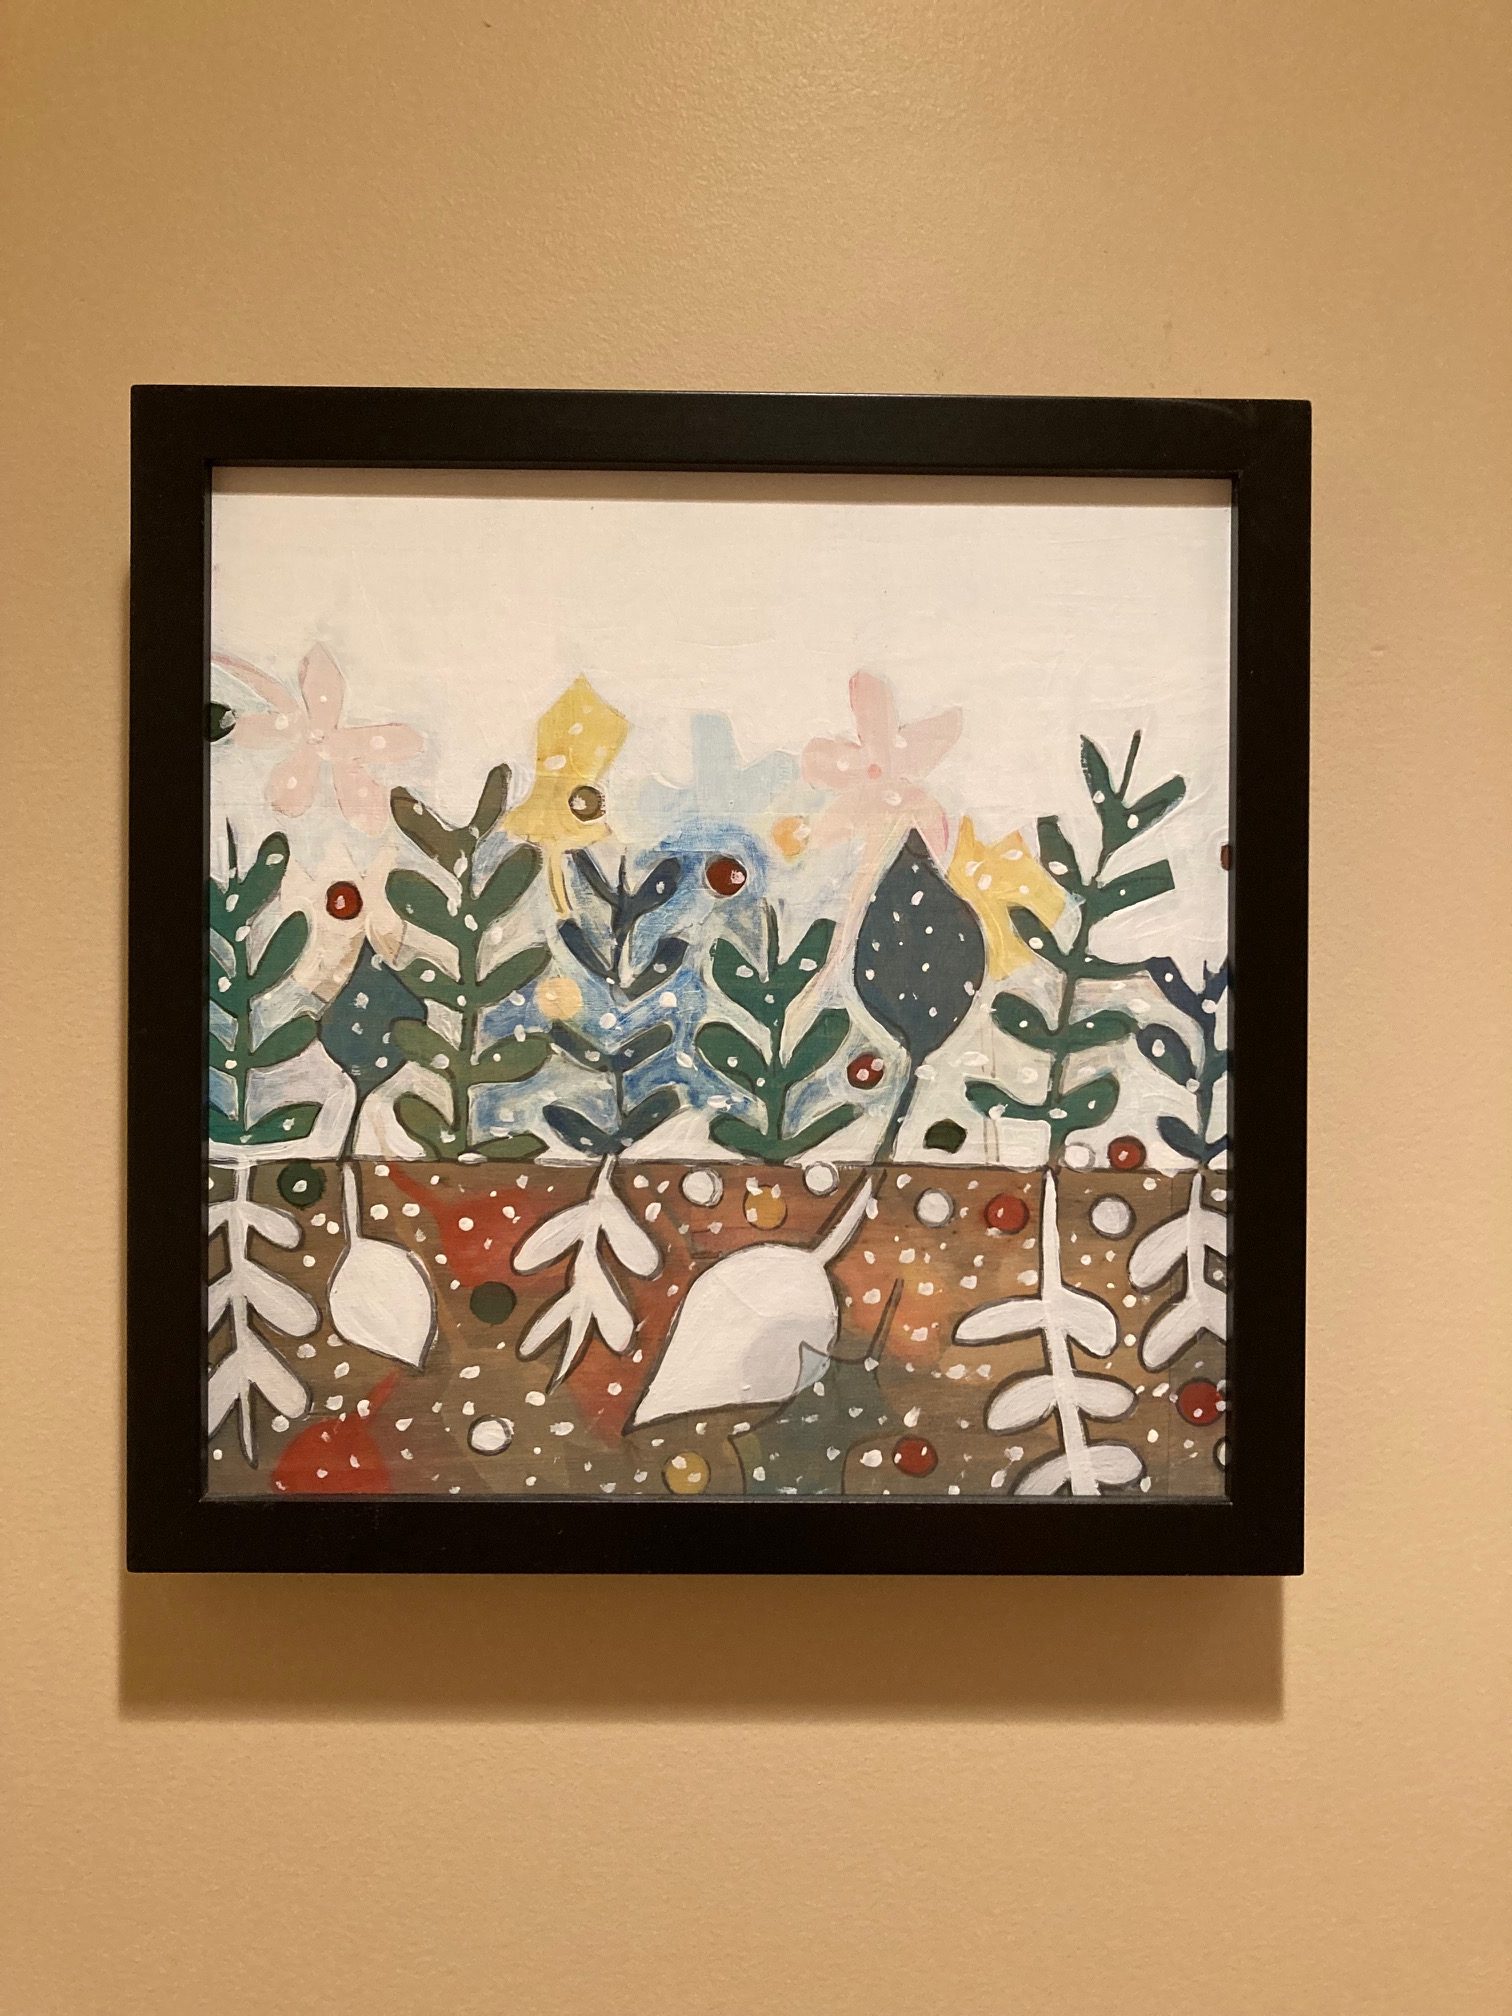 “Peace on Earth” finds a home